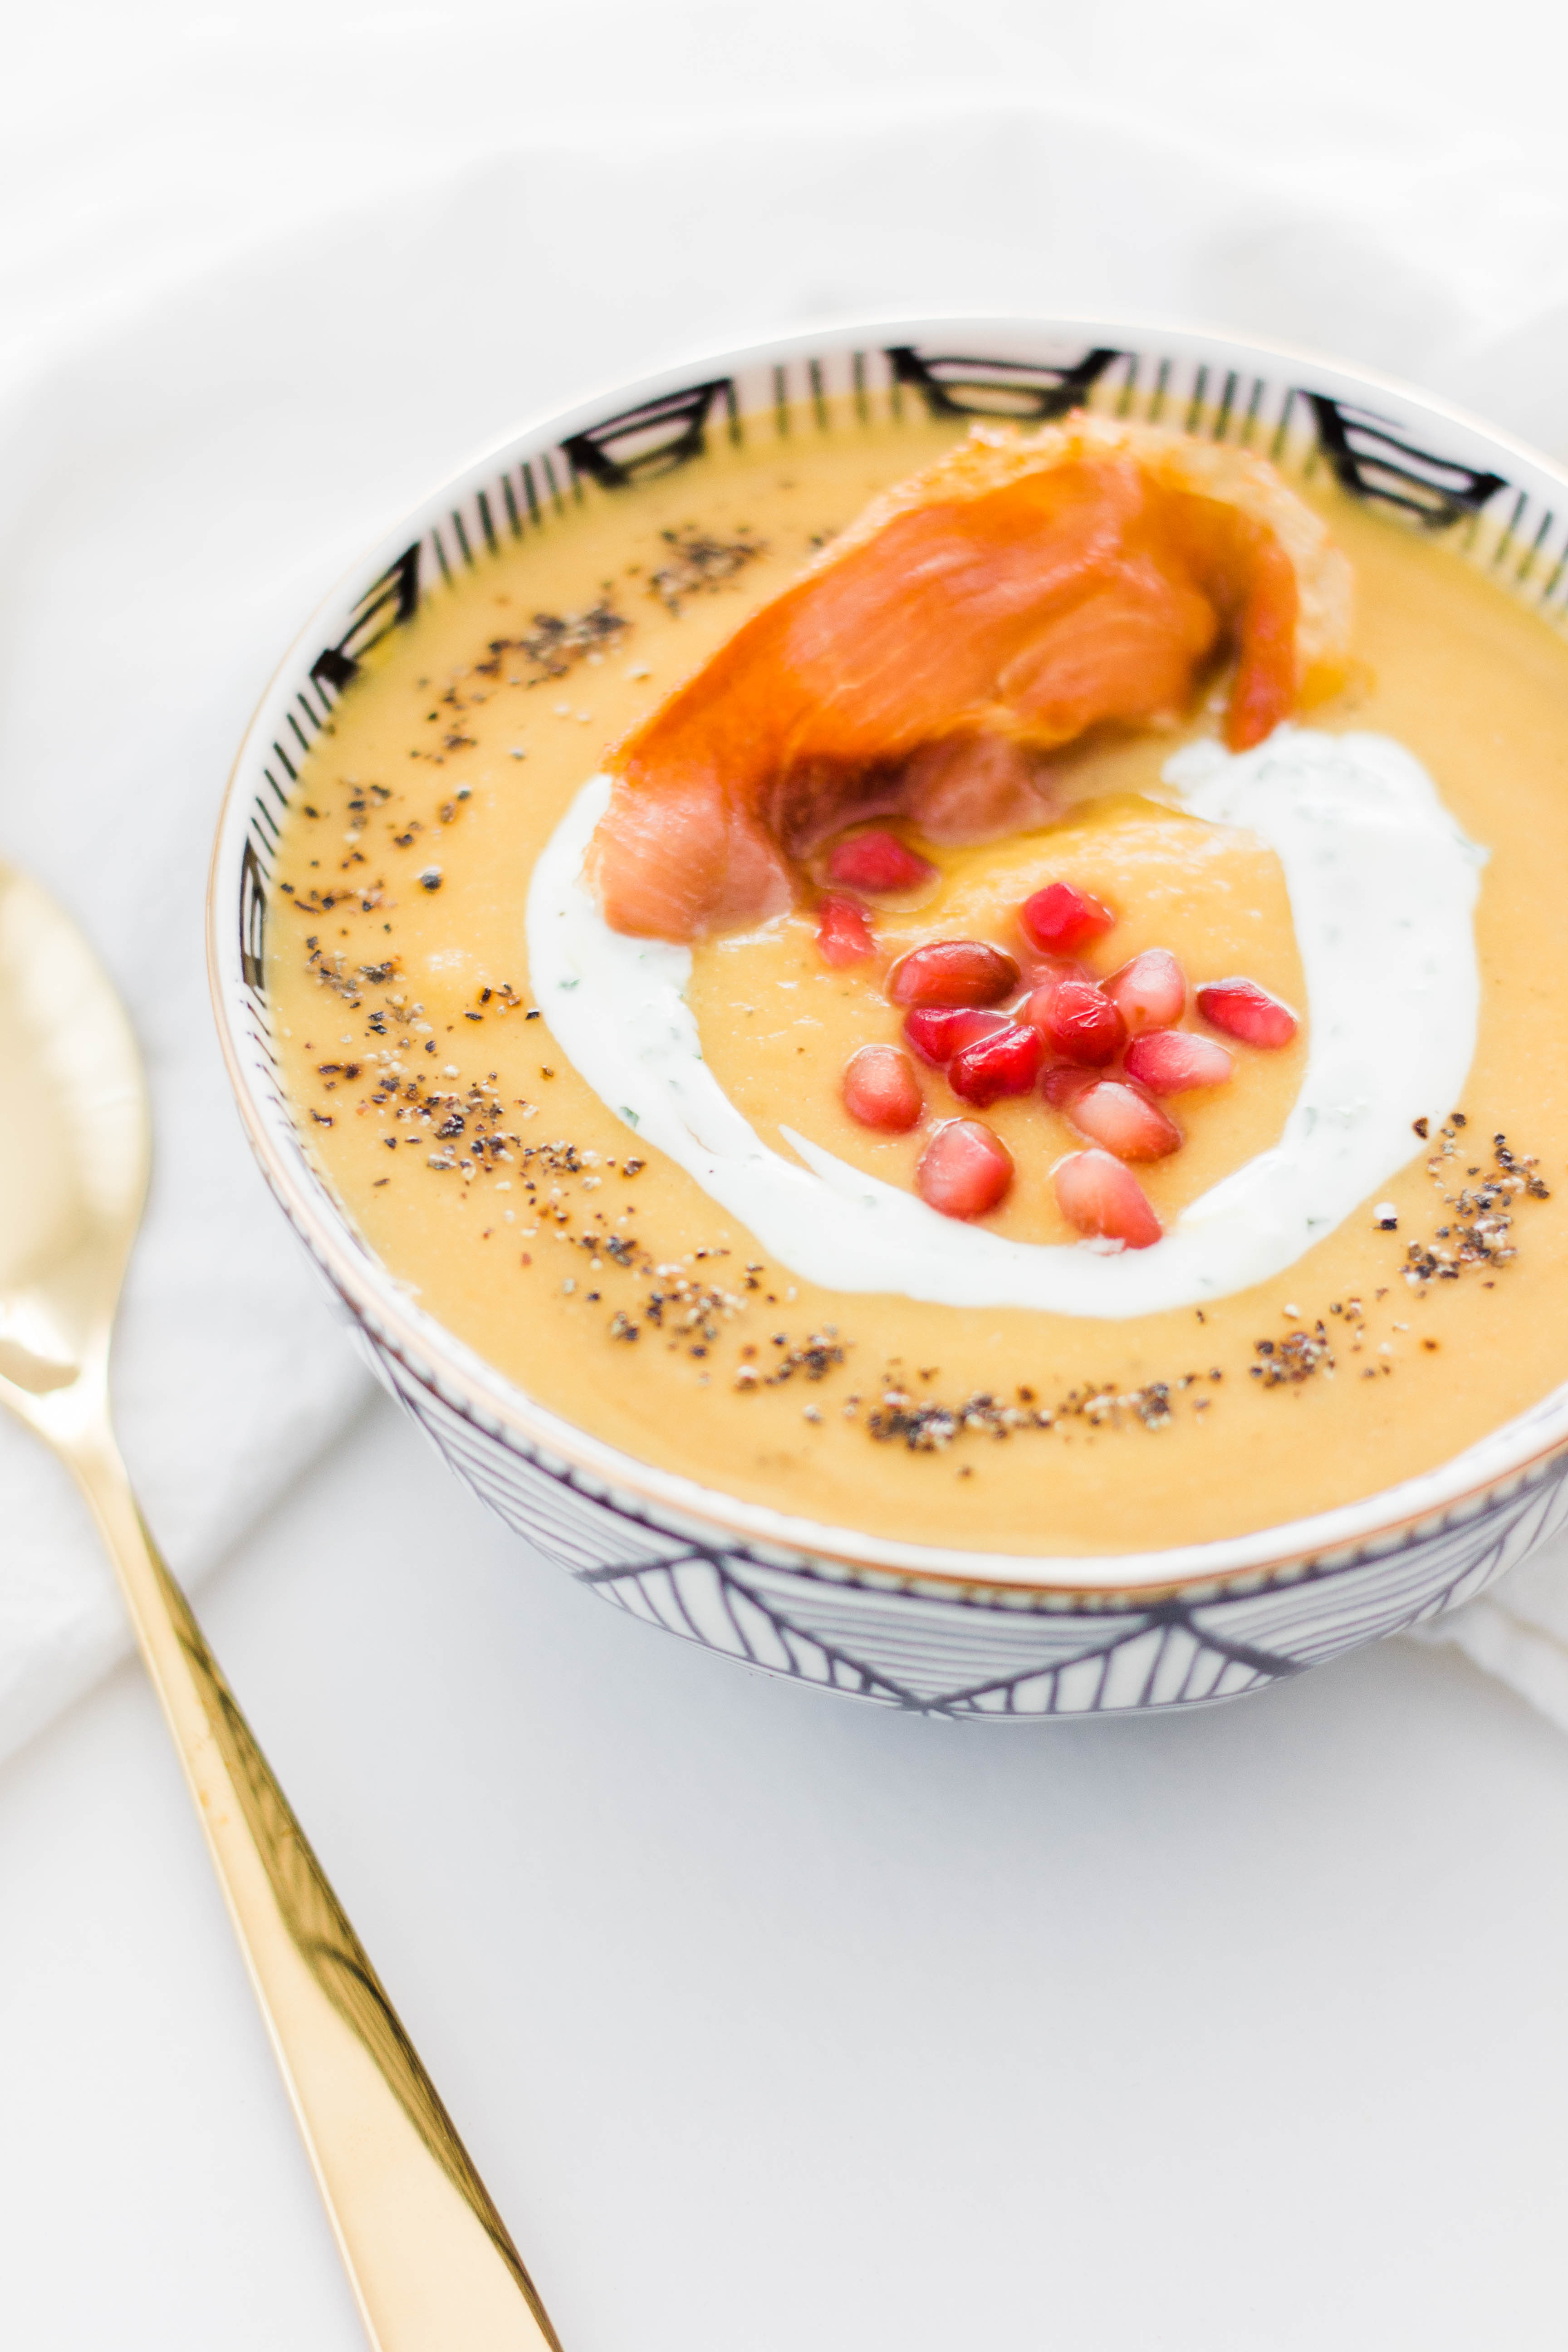 Roasted Butternut Squash and Cauliflower Soup